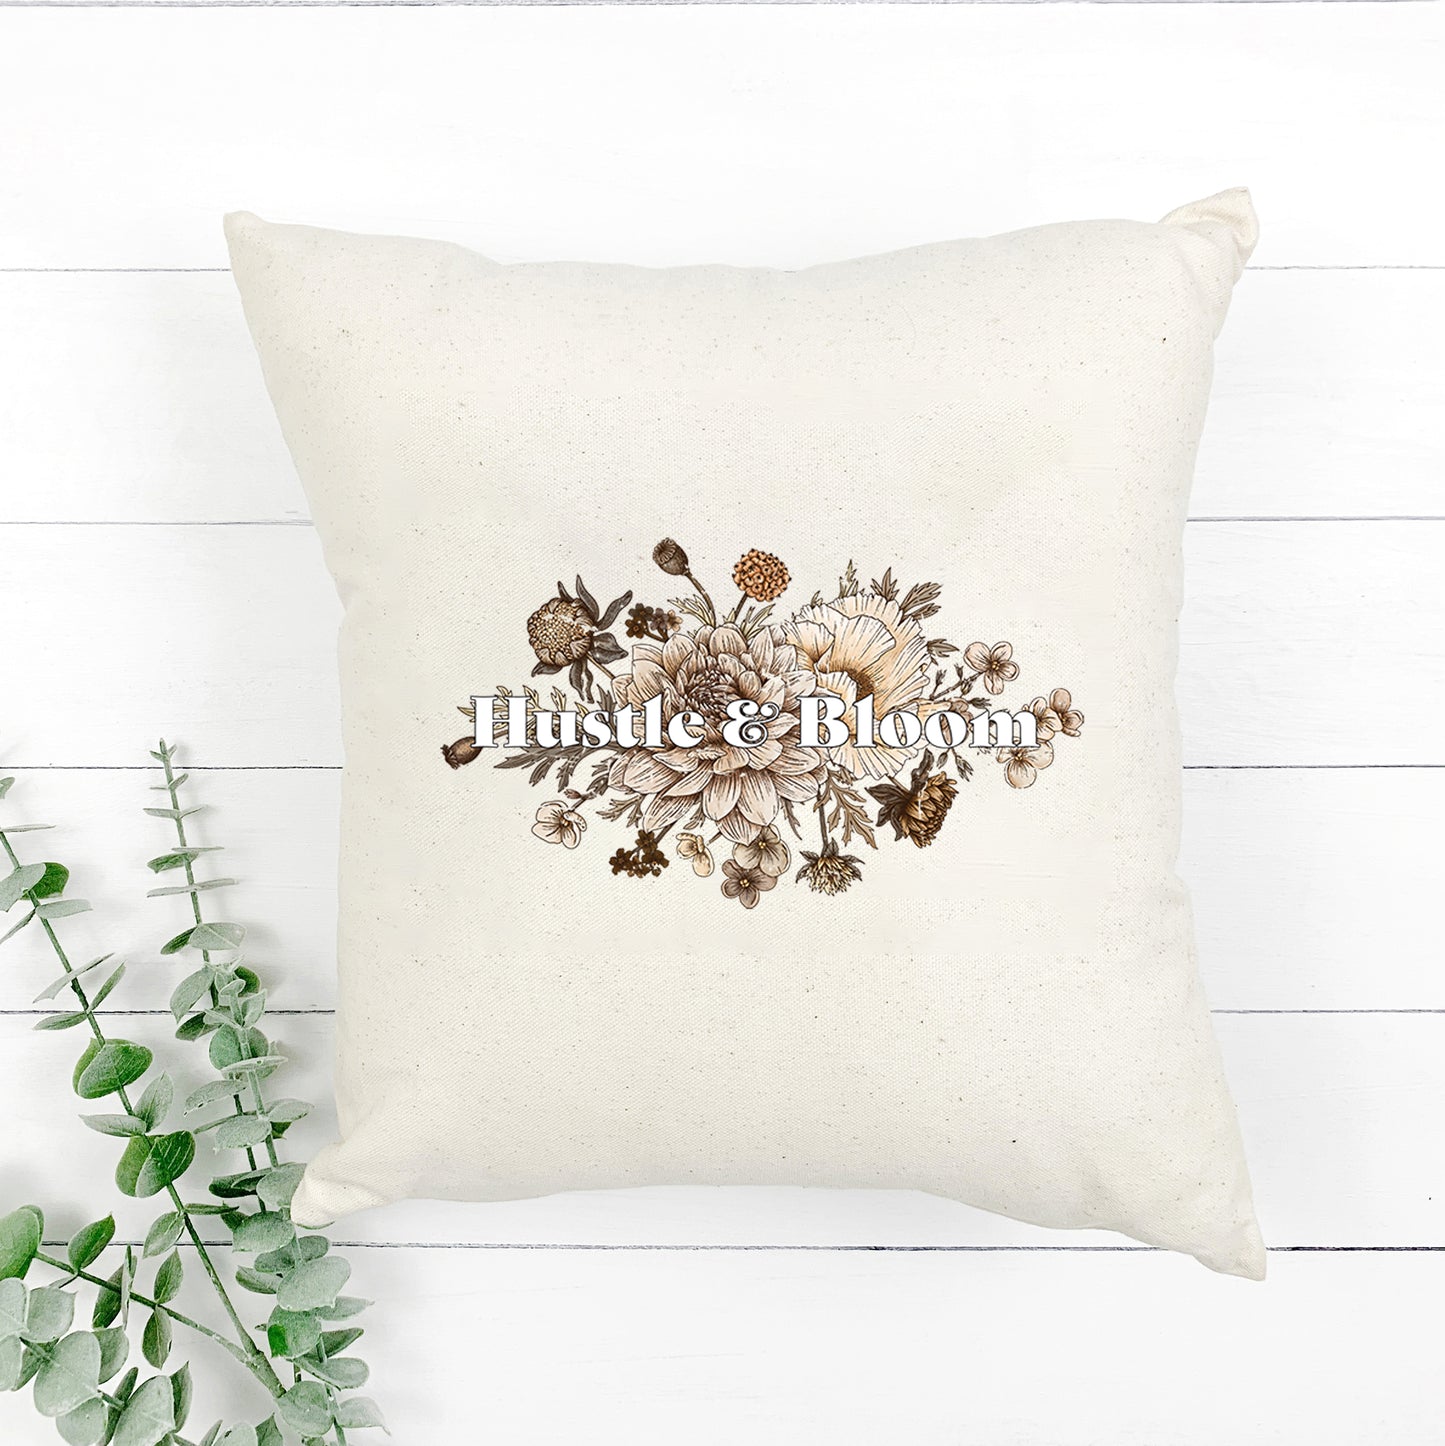 Hustle And Bloom | Pillow Cover